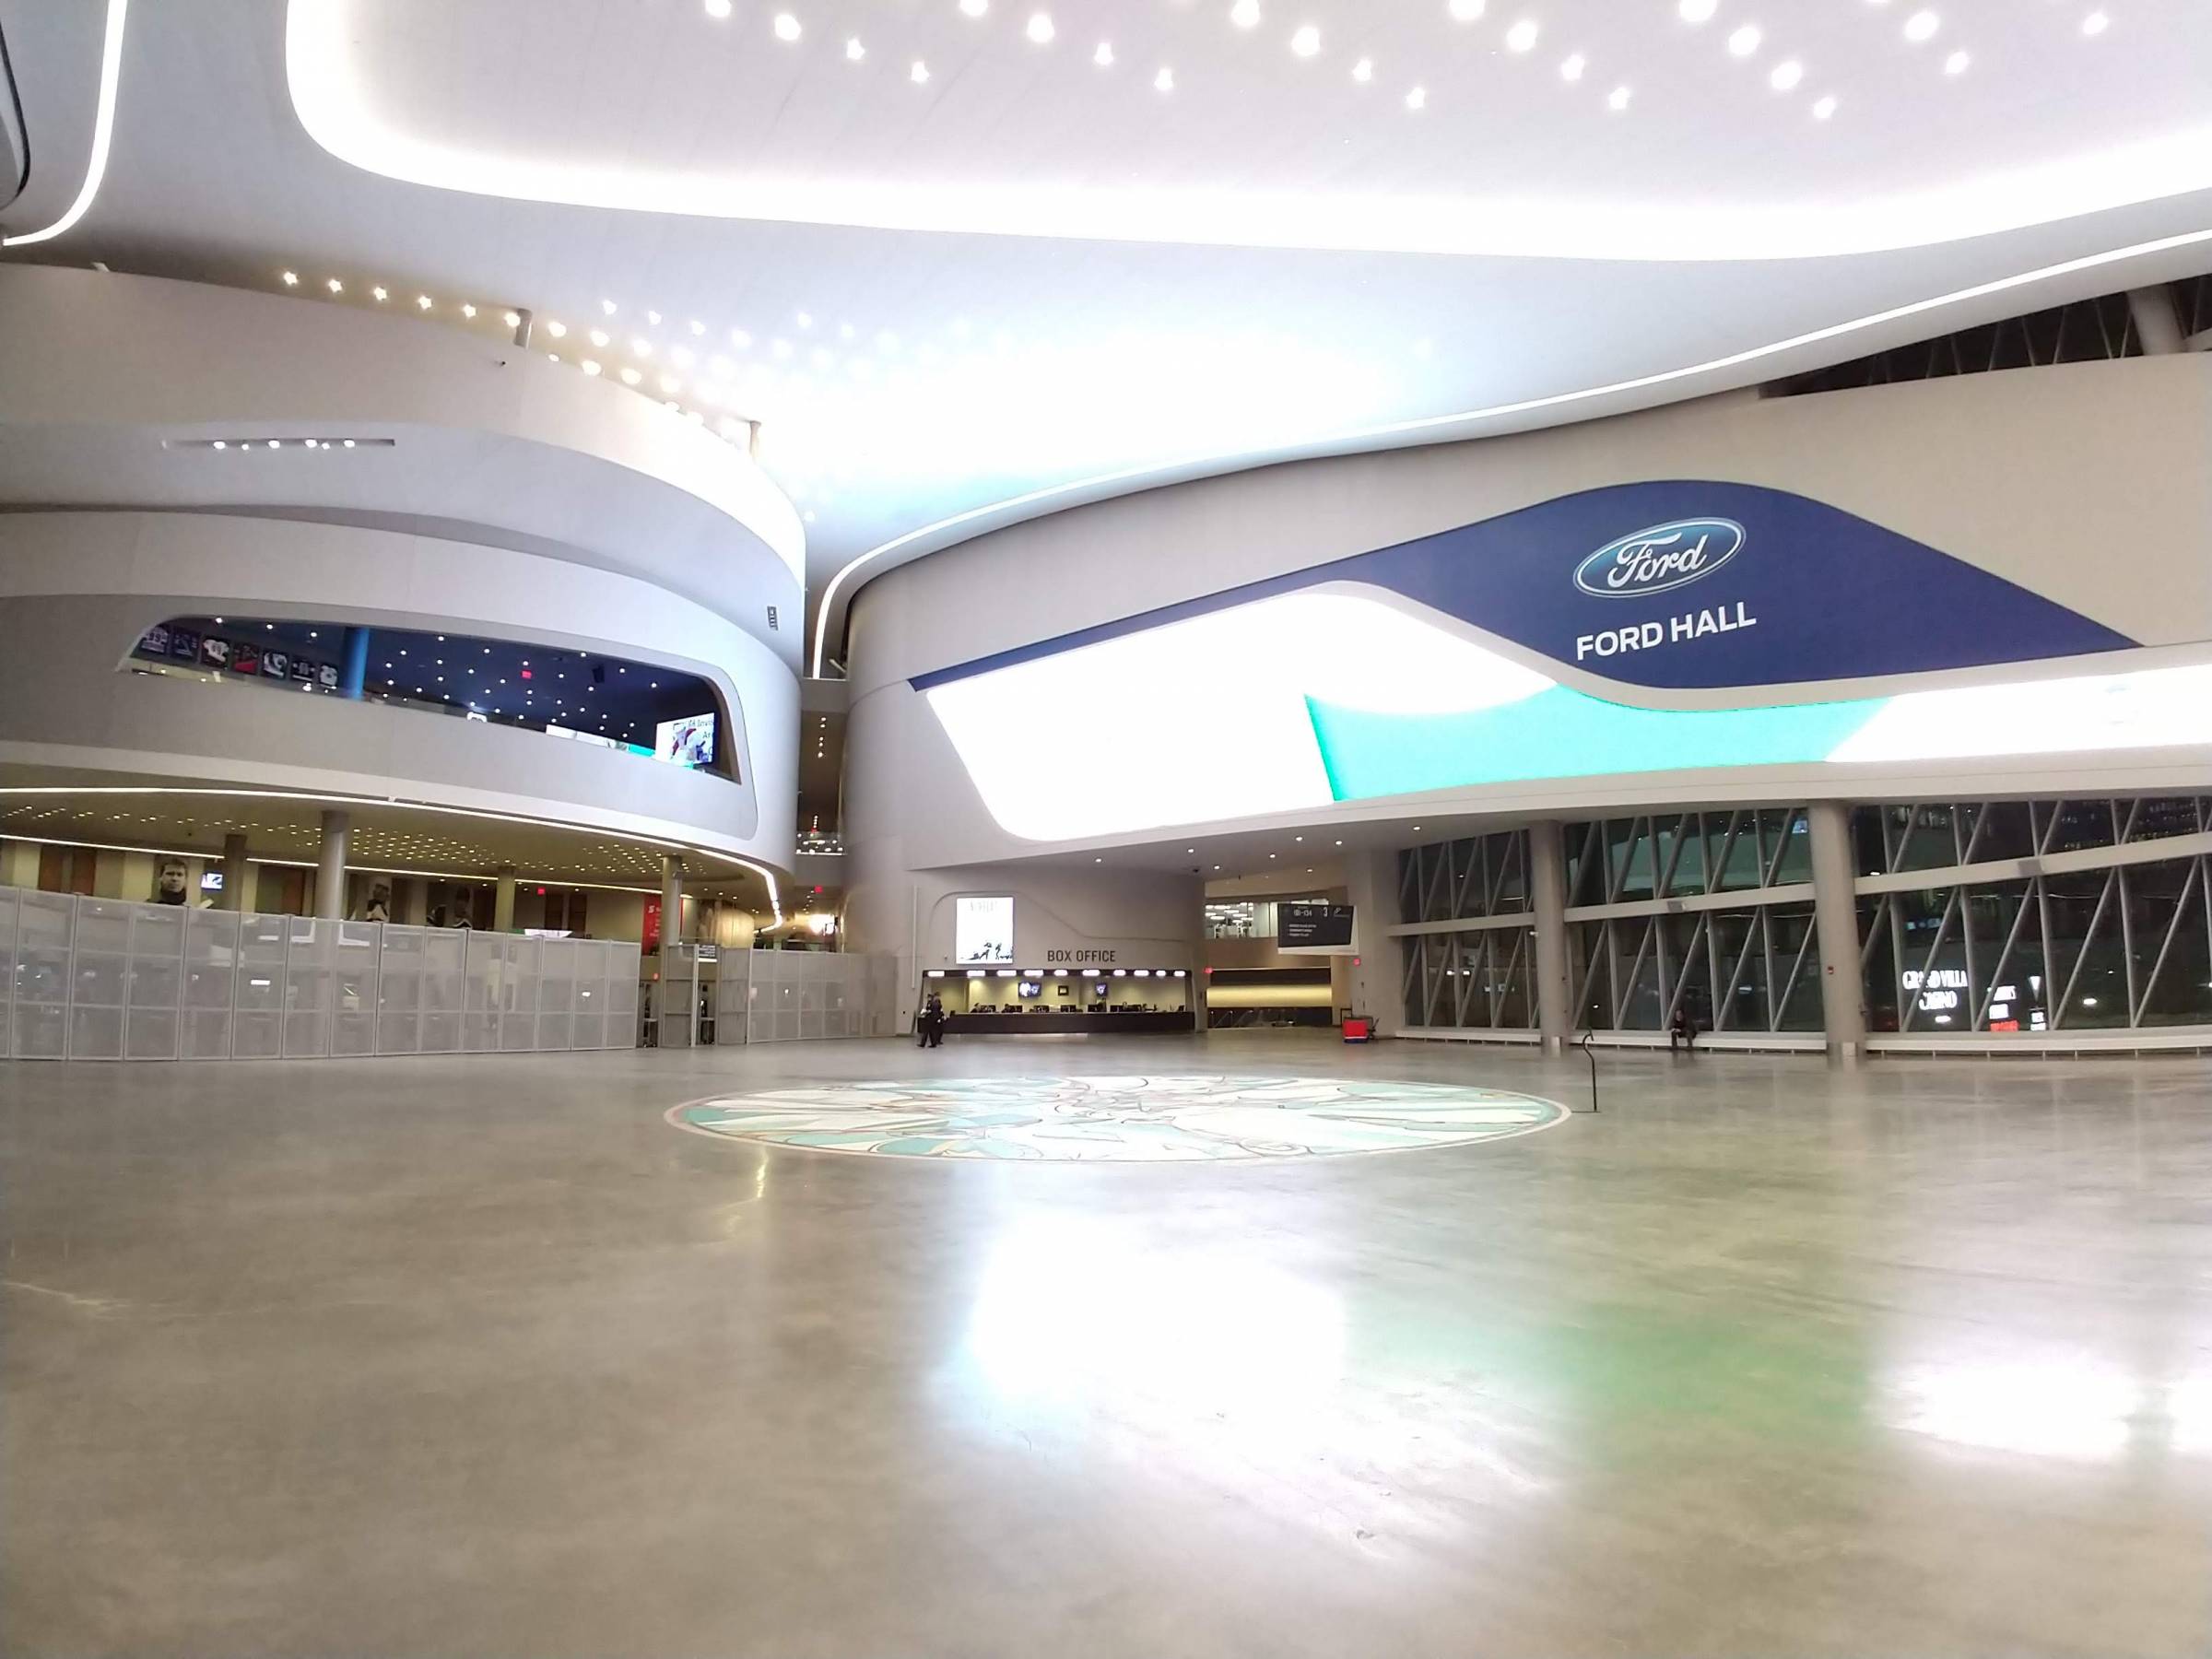 Ford Hall at Rogers Place